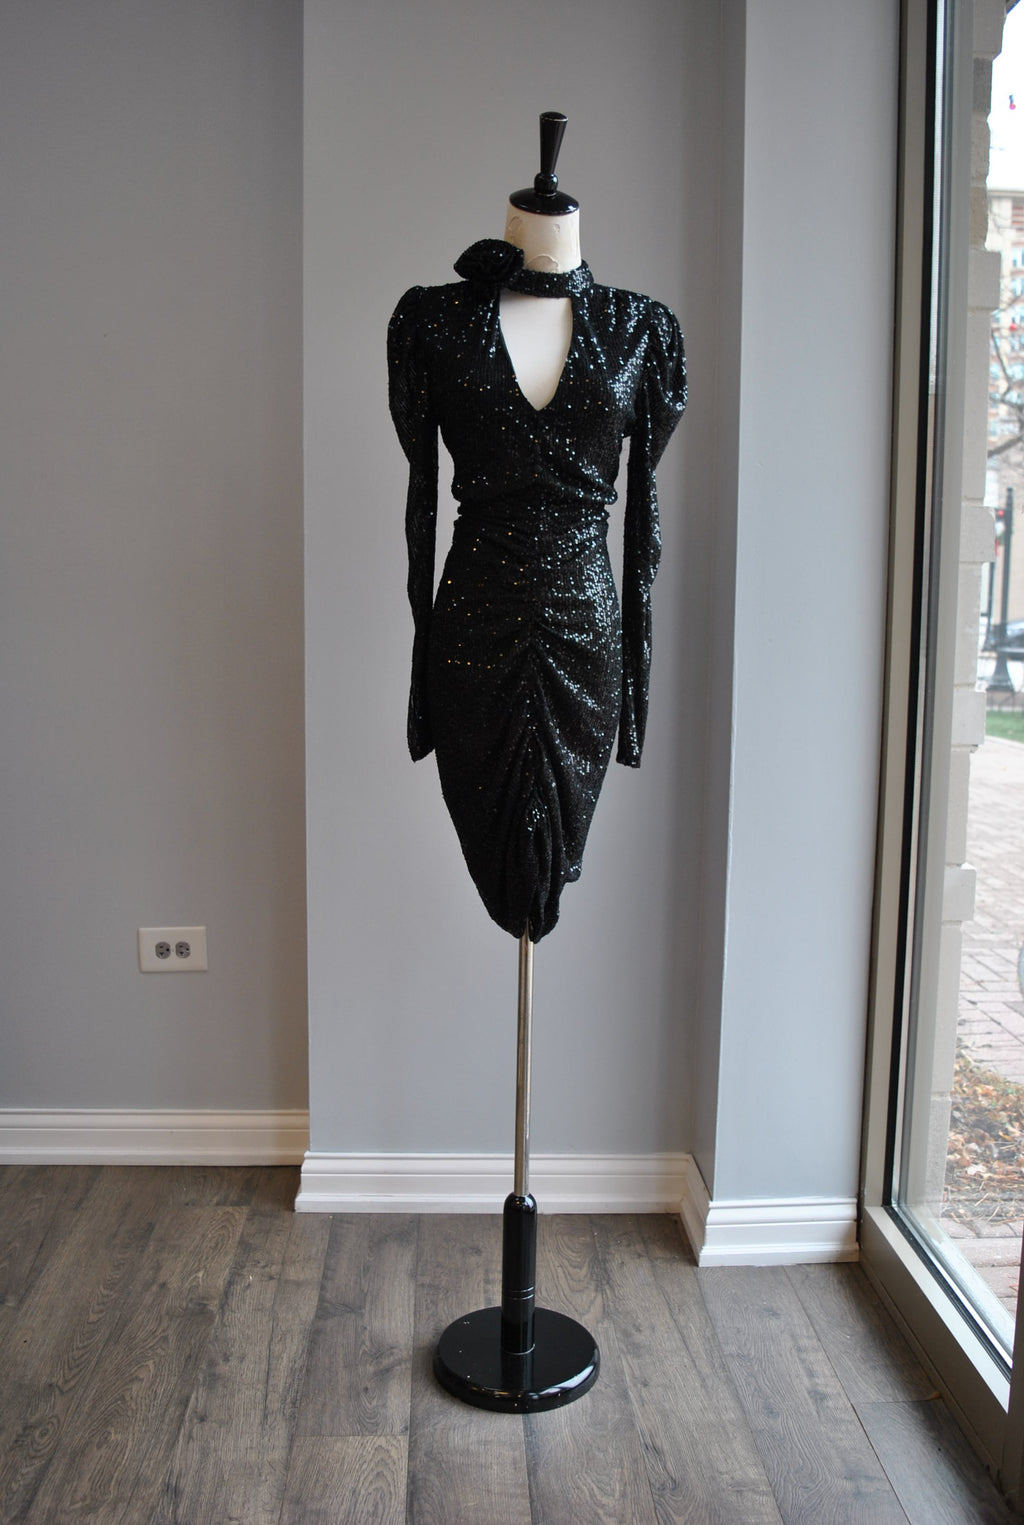 CLEARANCE - BLACK SEQUIN DRESS WITH A FLOWER